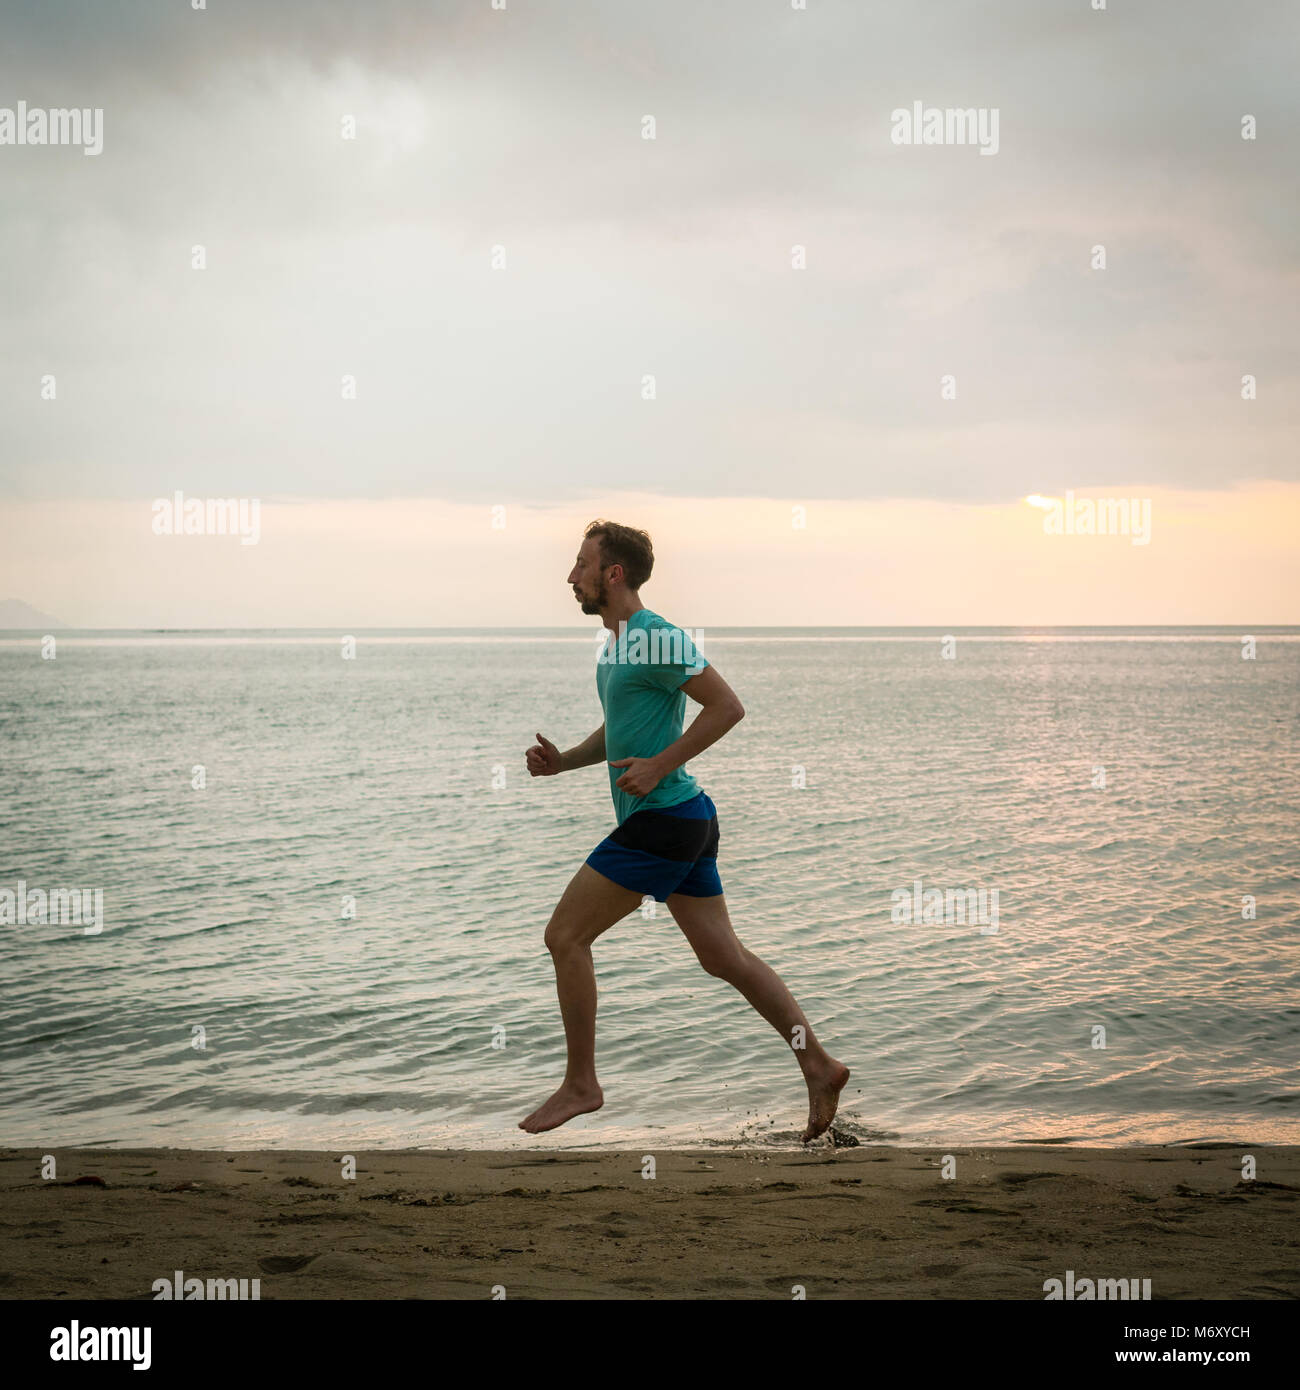 Athletic young man running on the beach during cardio workout session Stock Photo